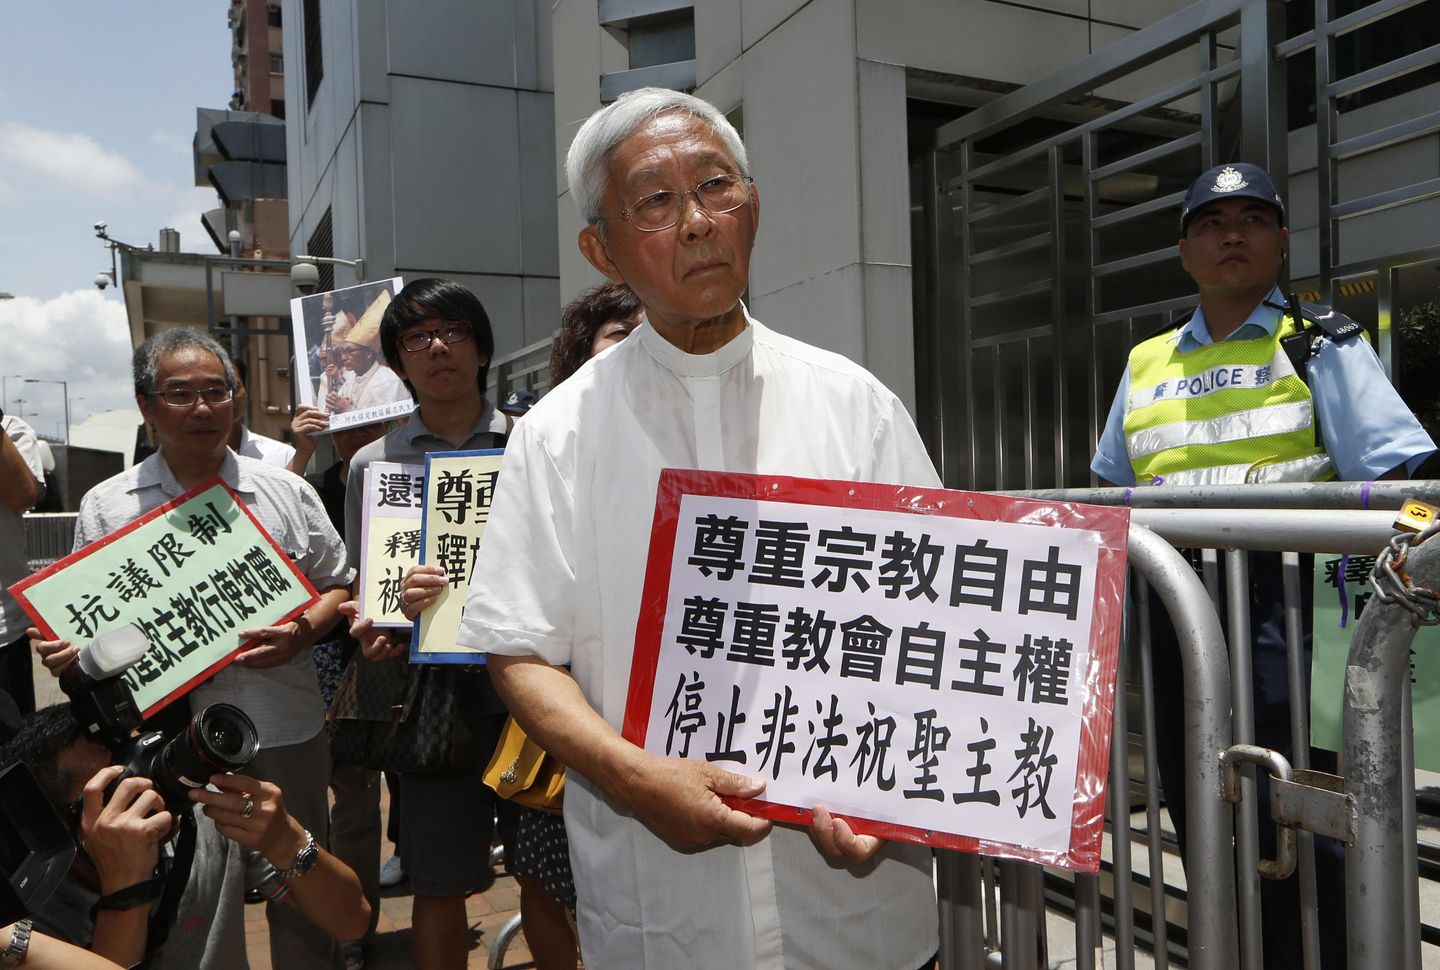 Hong Kong police arrest retired Catholic cardinal on national security charges, release him on bail